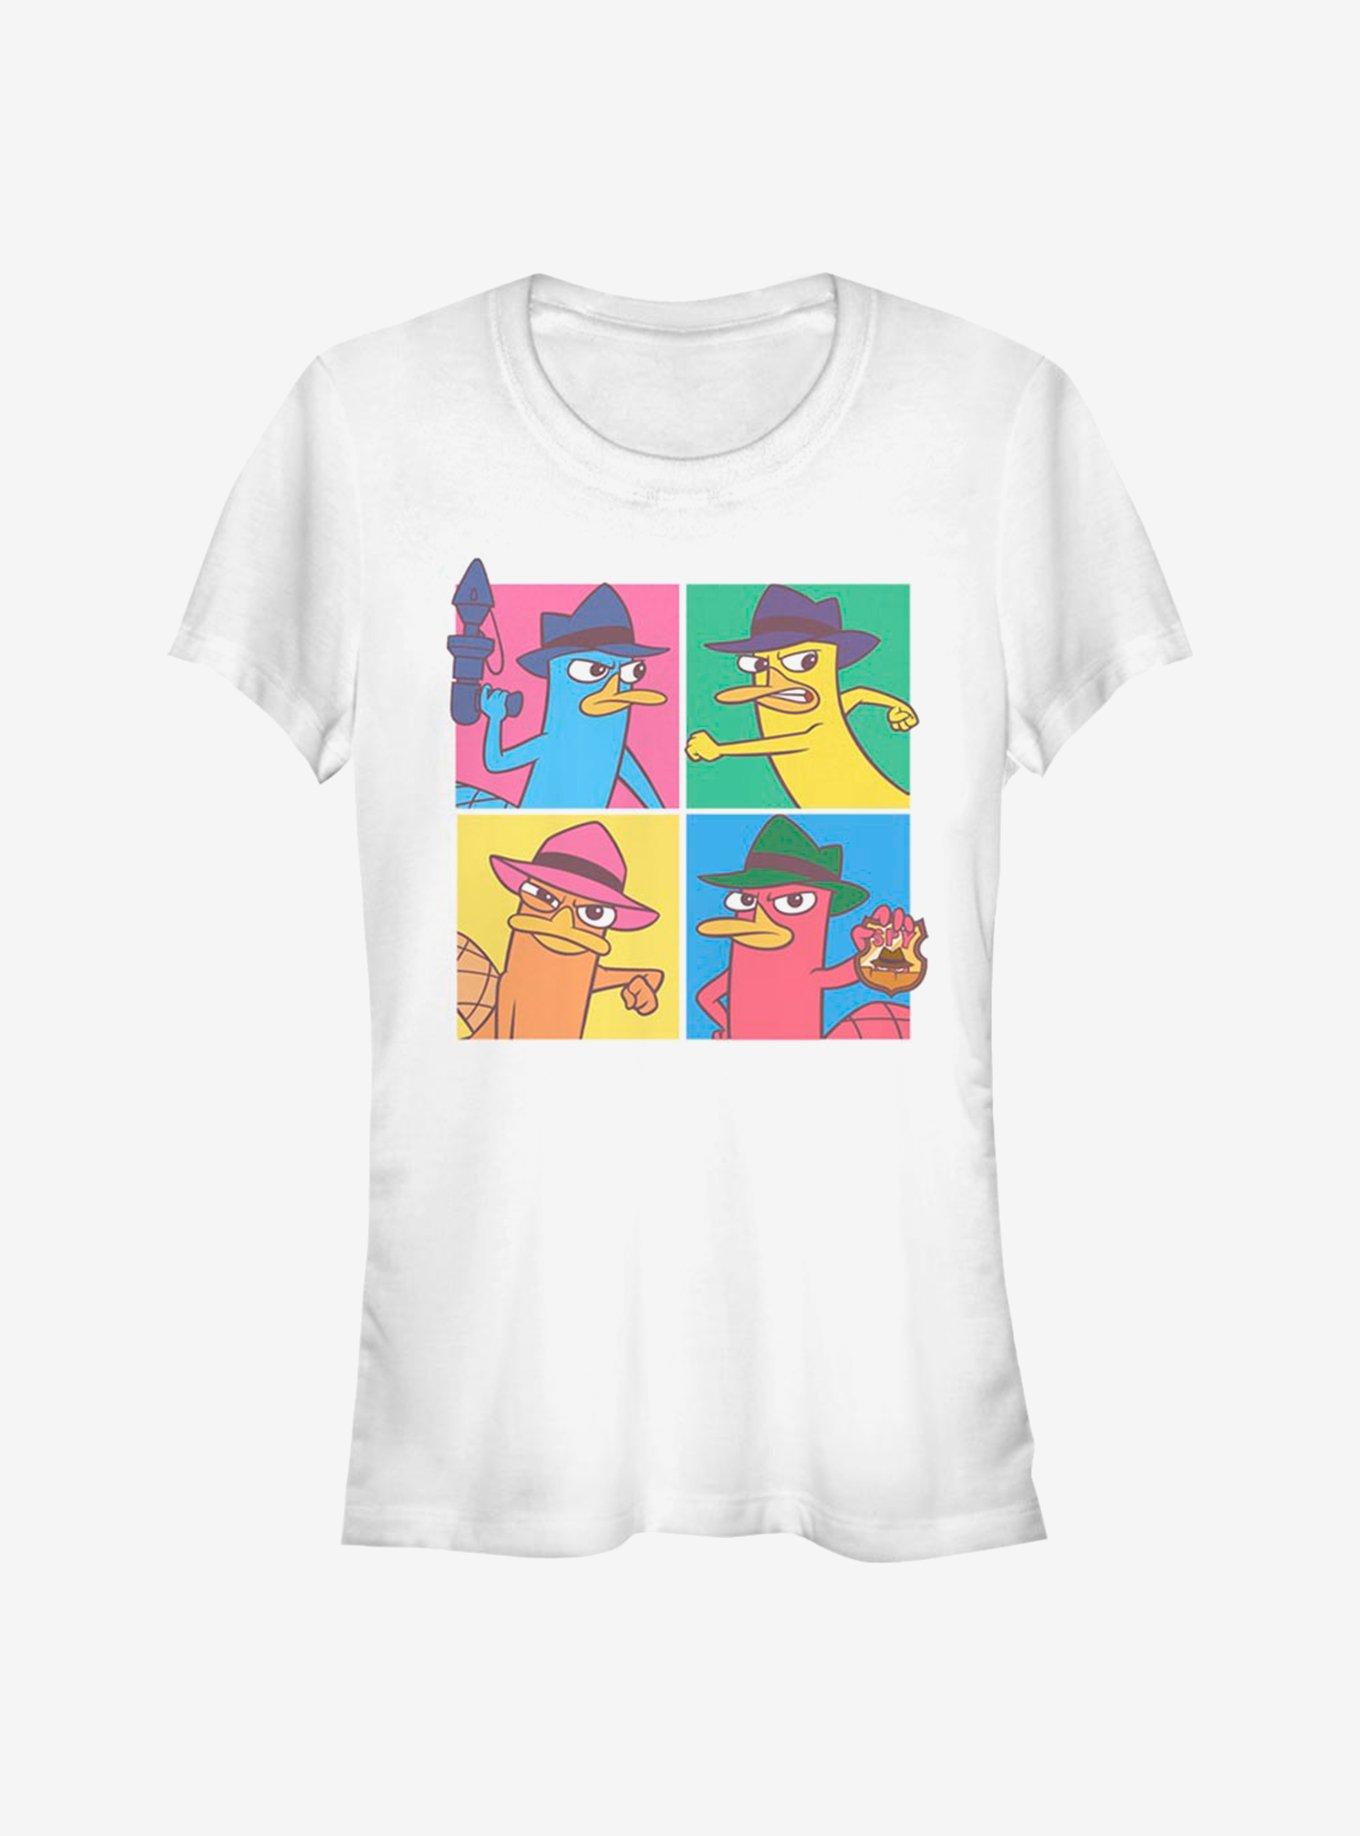 Disney Phineas And Ferb Agent P Pop Art Boxes Girls T-Shirt, WHITE, hi-res